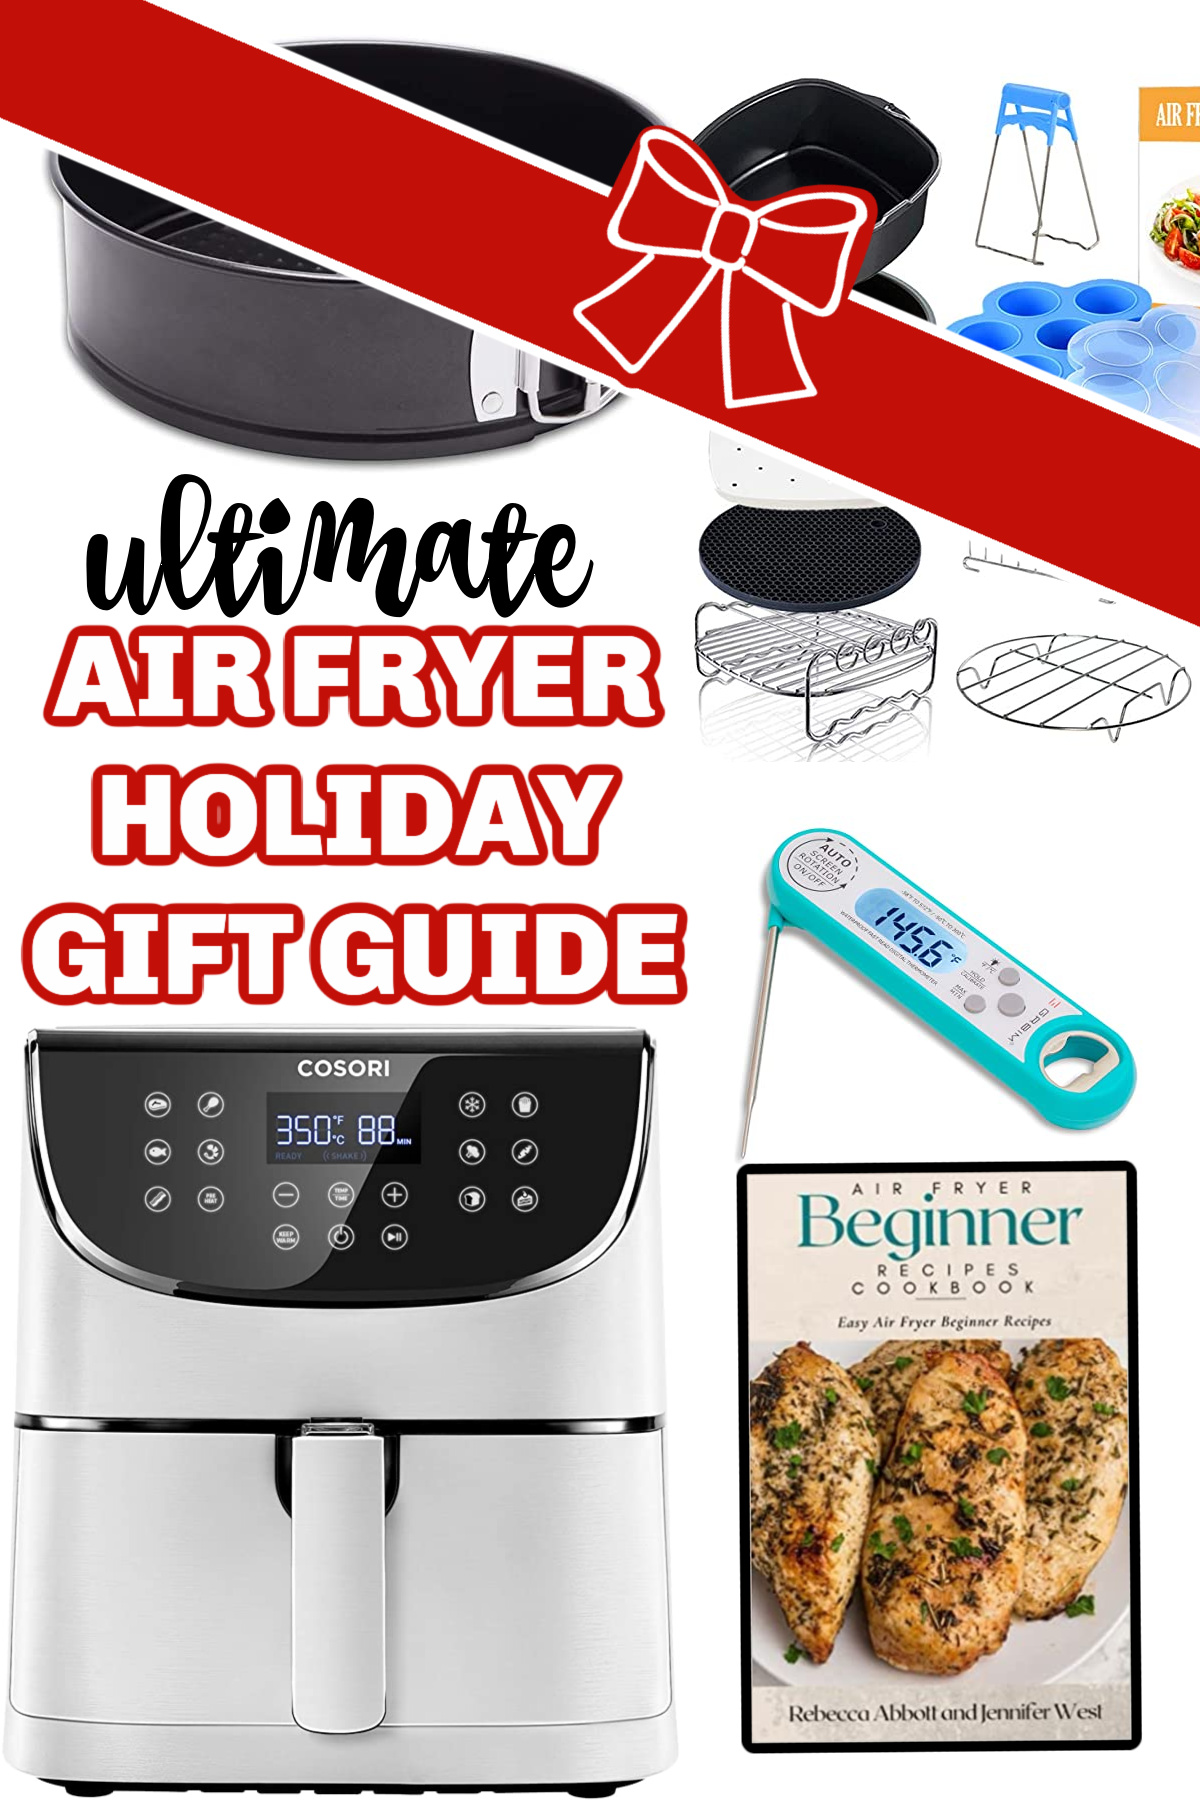 Photo with collage of photos and ideas for air fryer gifts this holiday season with a red ribbon and bow on top. 